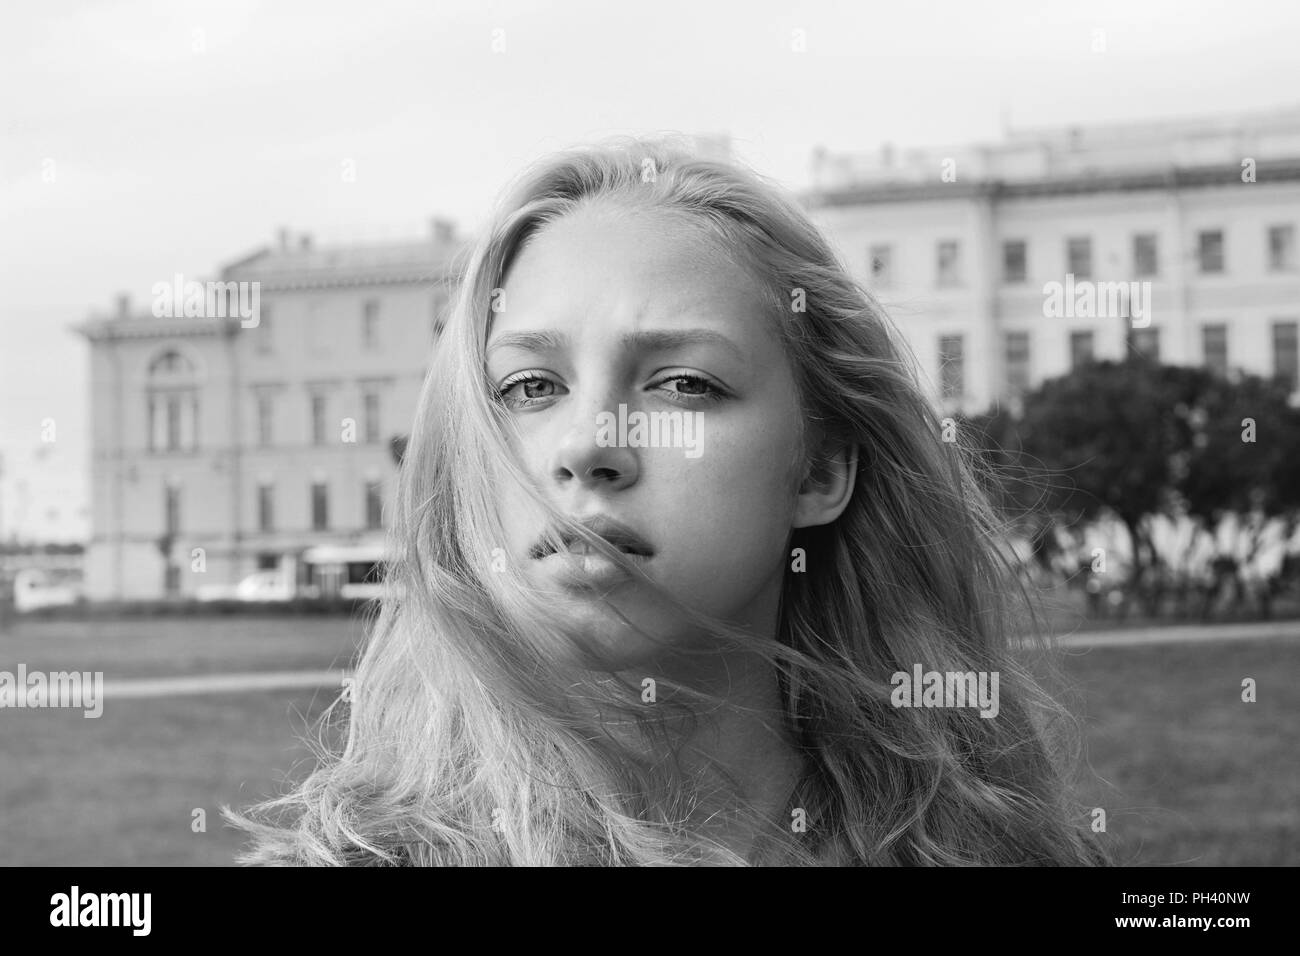 A young girl with blond long hair on a background of a city park. Black and white. Stock Photo